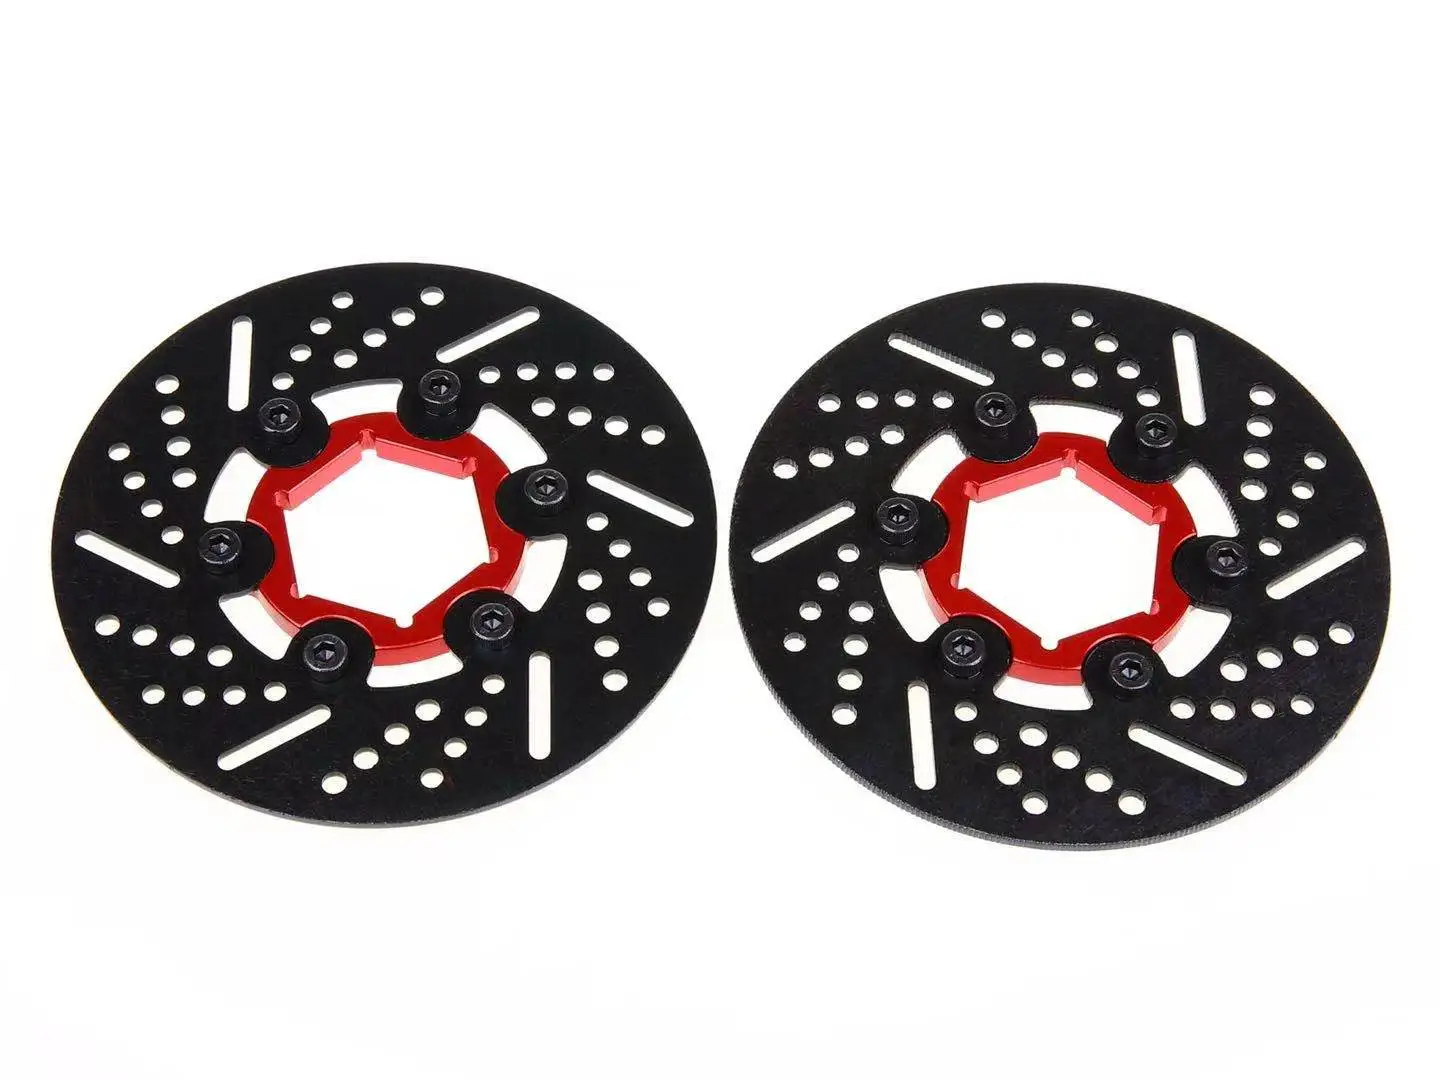 Silver Drfeify 4pcs RC Brake Disc Set,Durable Aluminum Alloy Brake Disc Upgrade Replacement Parts for 1:10 RC Car 